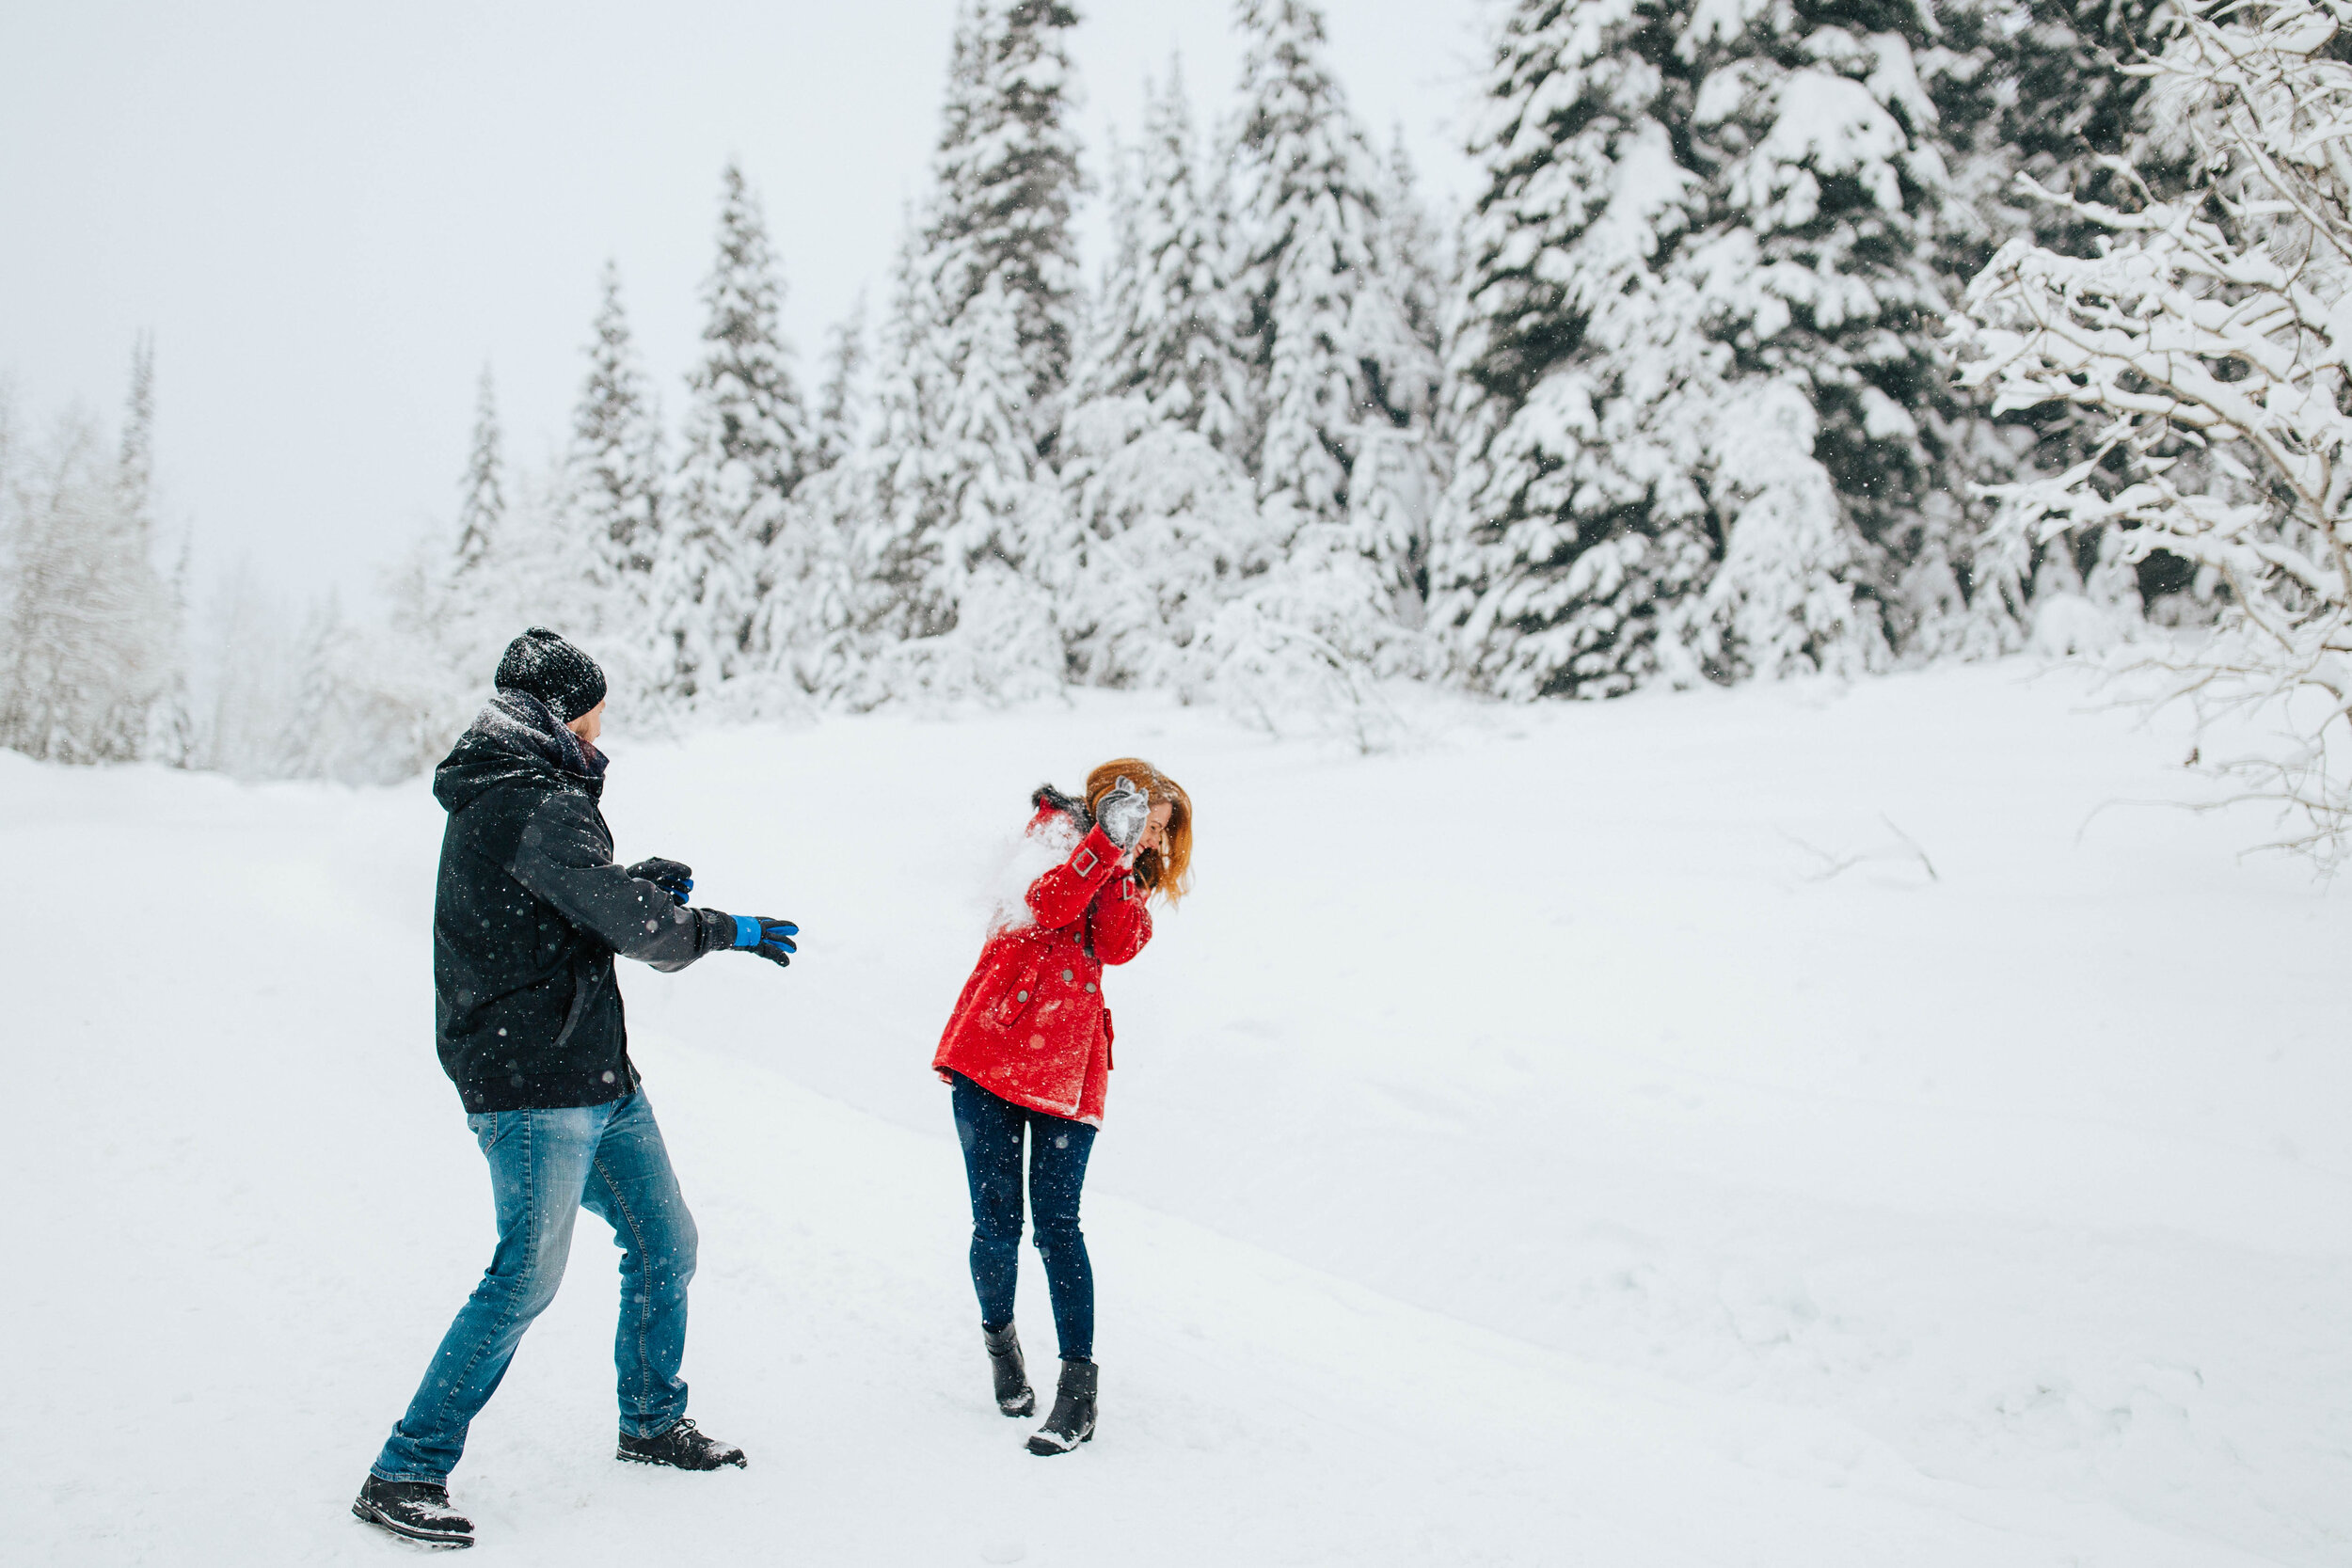 Winter couples session engagements snow mountains cozy wrapped in blanket #coupleshoot #utahphotographer #weddingphotographer #engagementsession #engagementshoot snowball fight #snowballfight